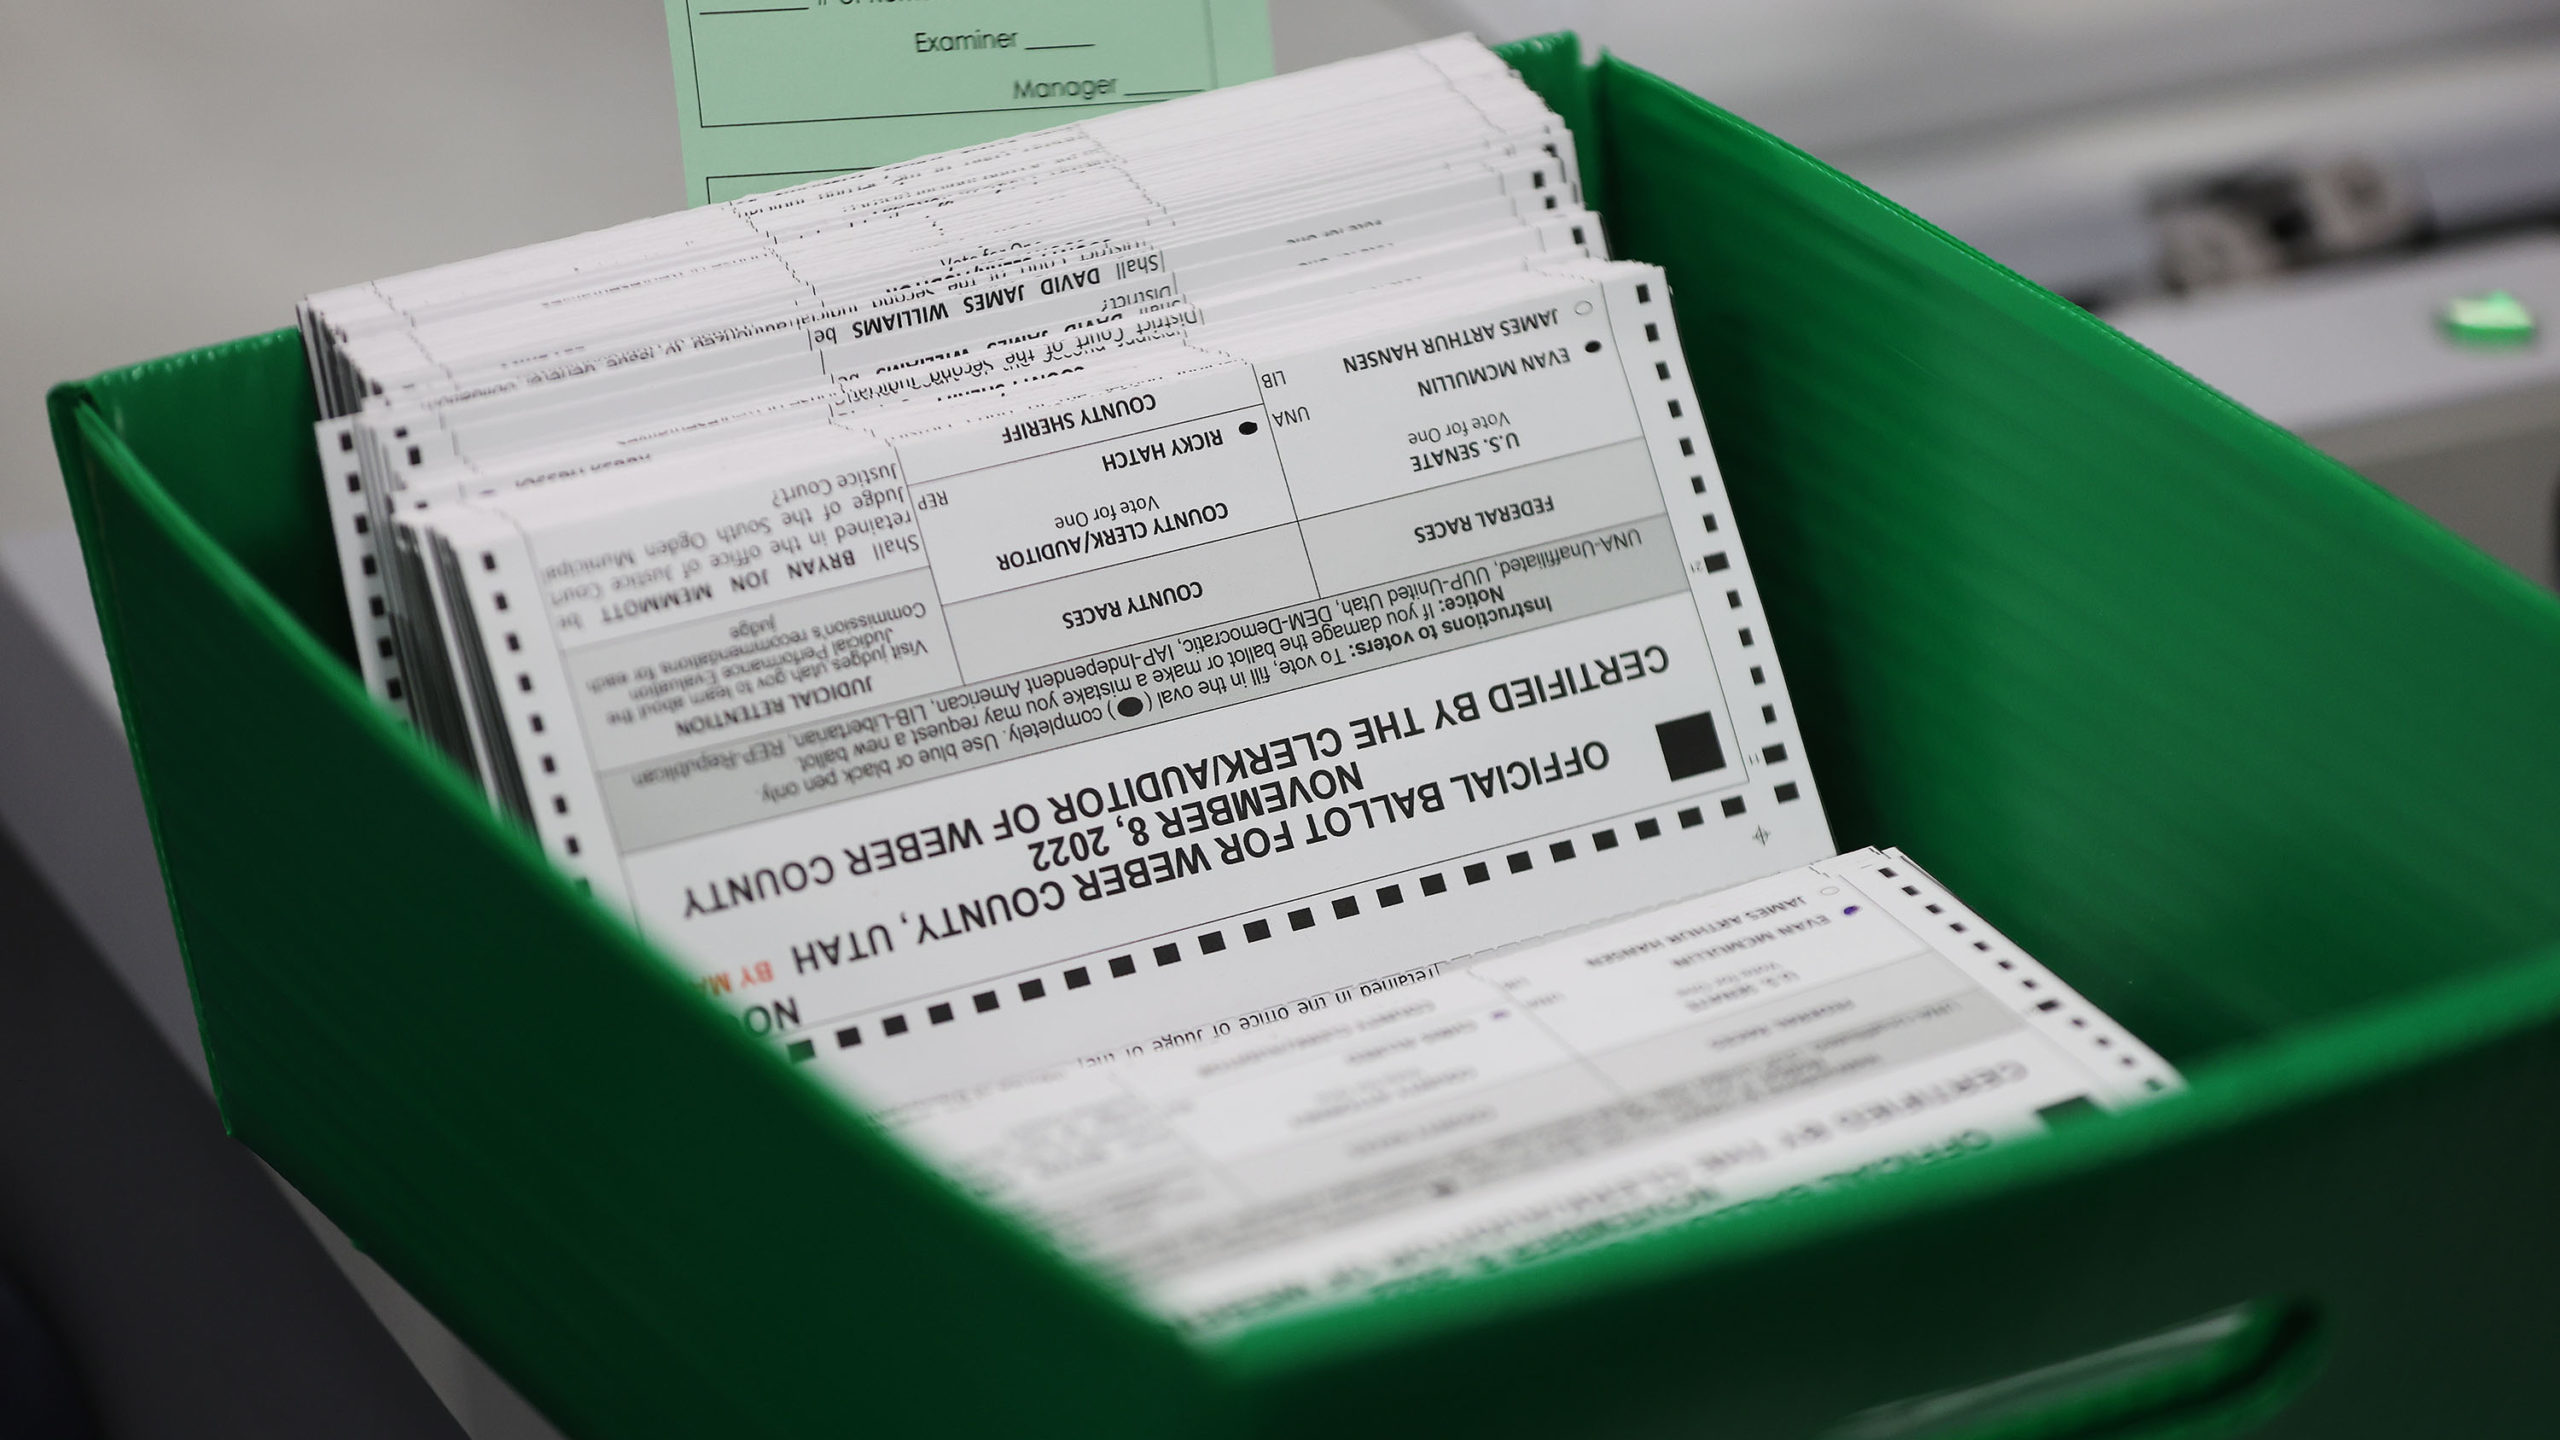 Images of ballots. A judicial review committee says that Utah voters too often leave blank their vo...